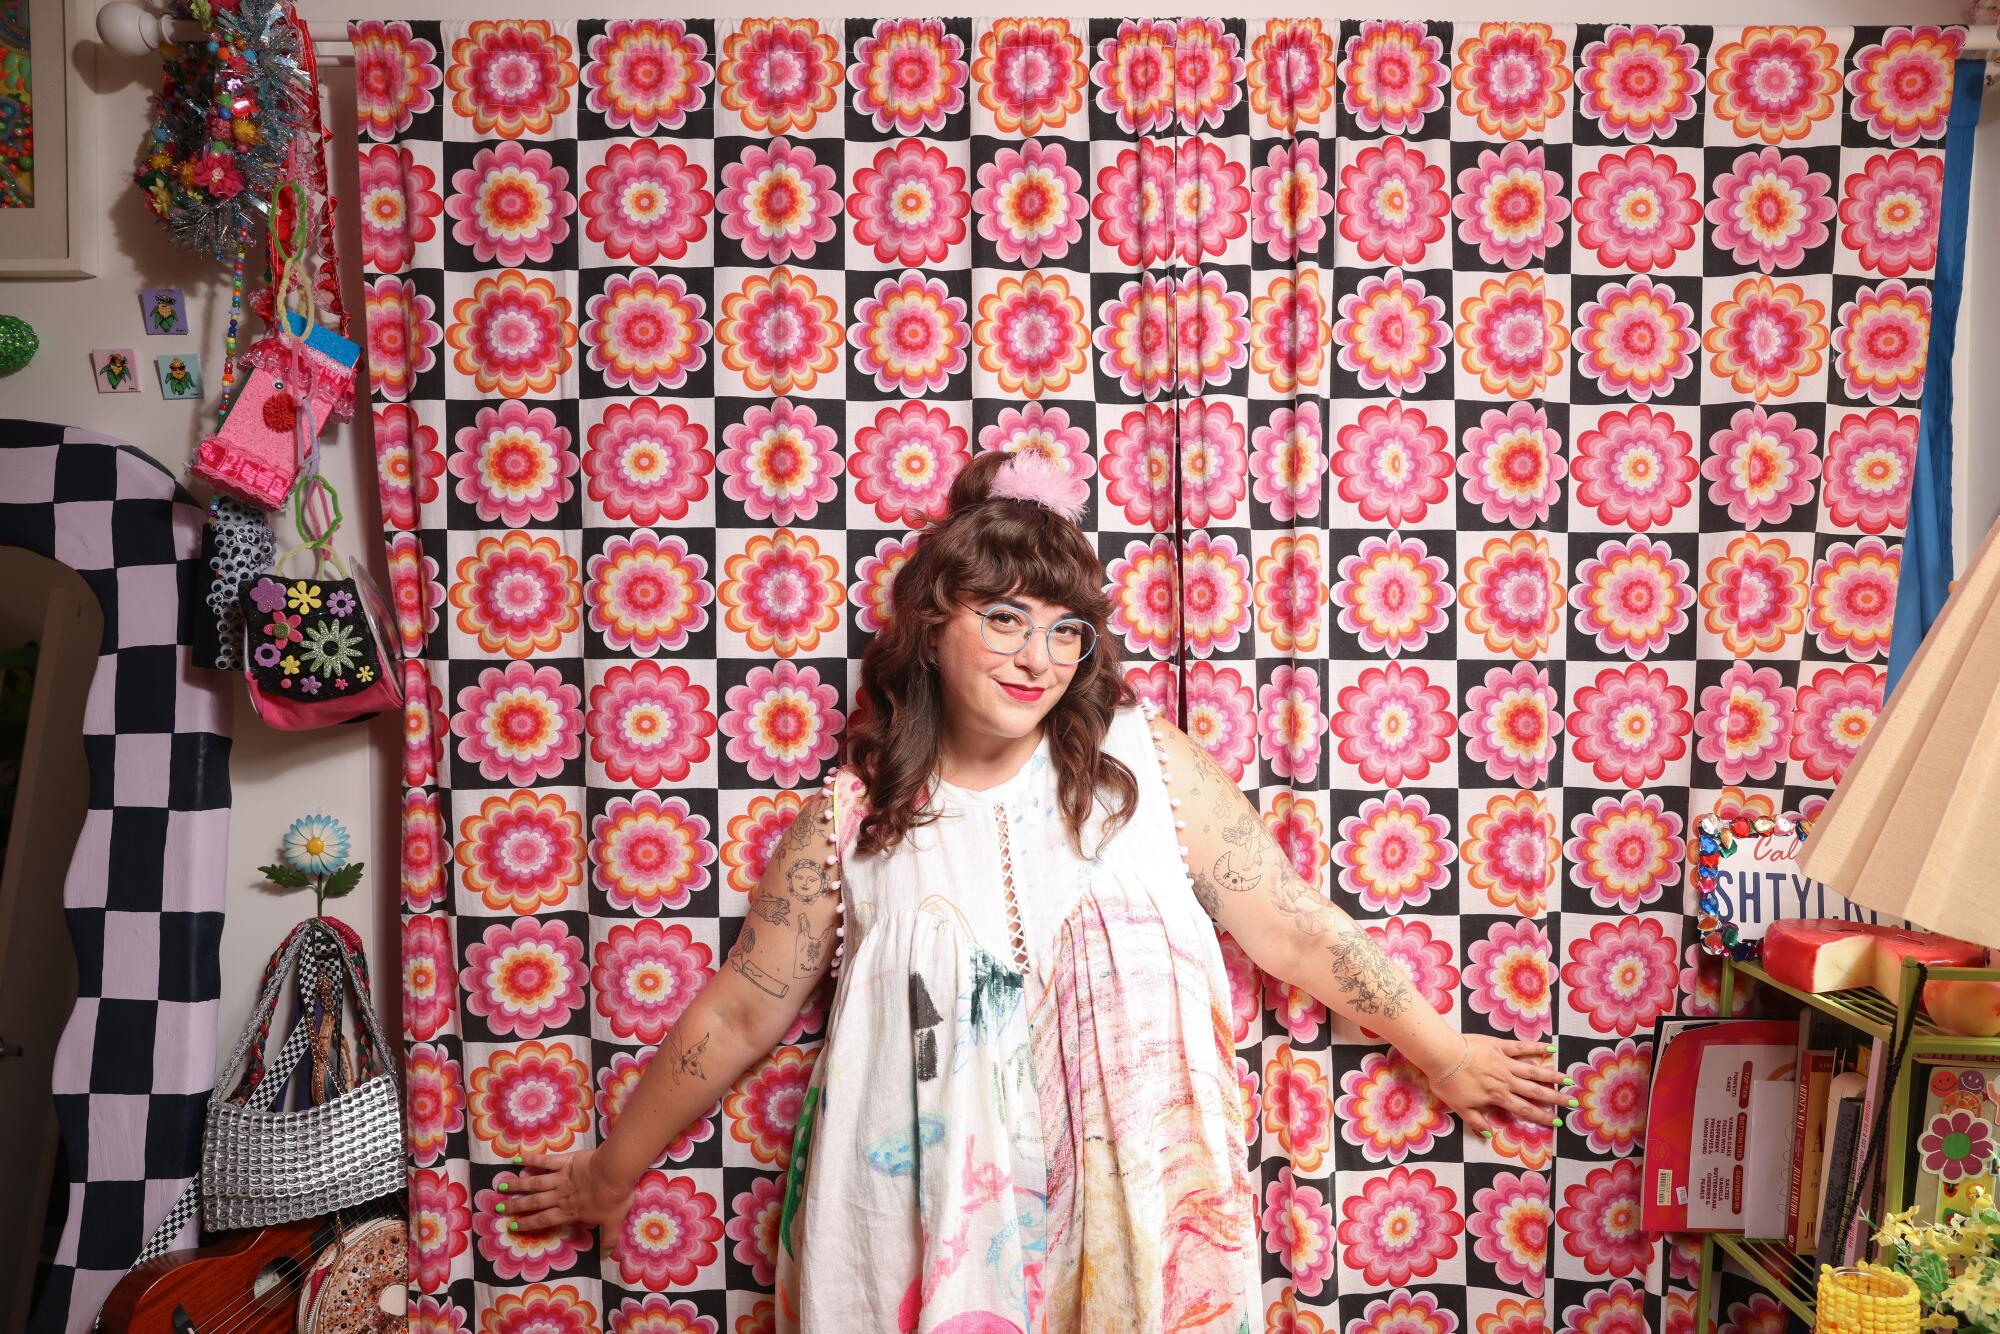 Sam Reece stands in front of a pink floral curtain in her crafting studio.